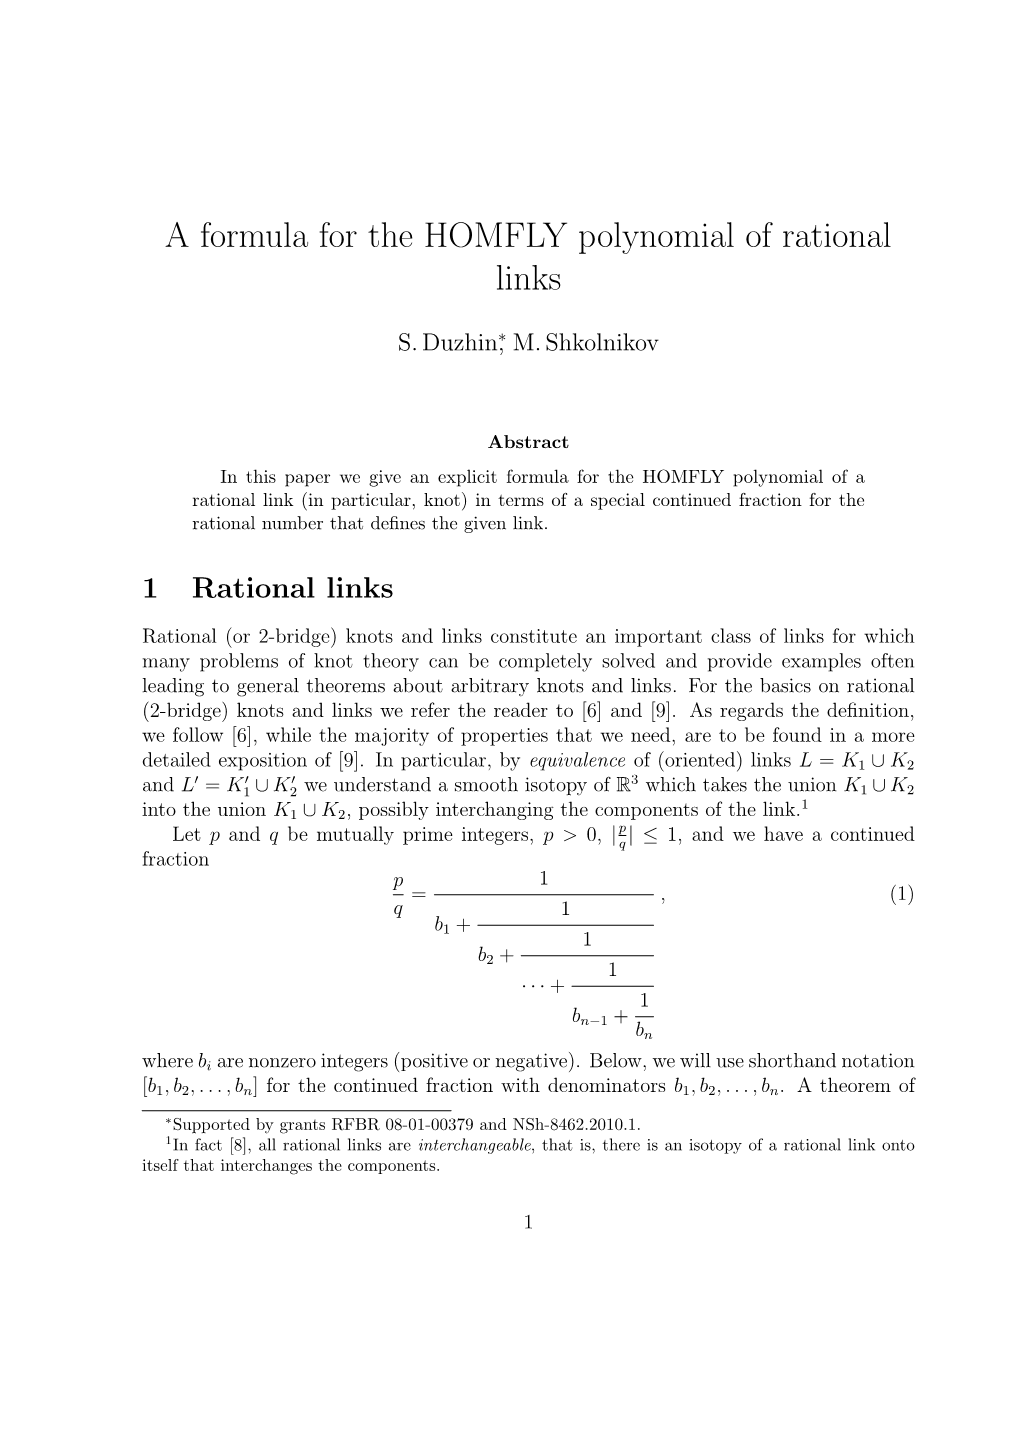 A Formula for the HOMFLY Polynomial of Rational Links